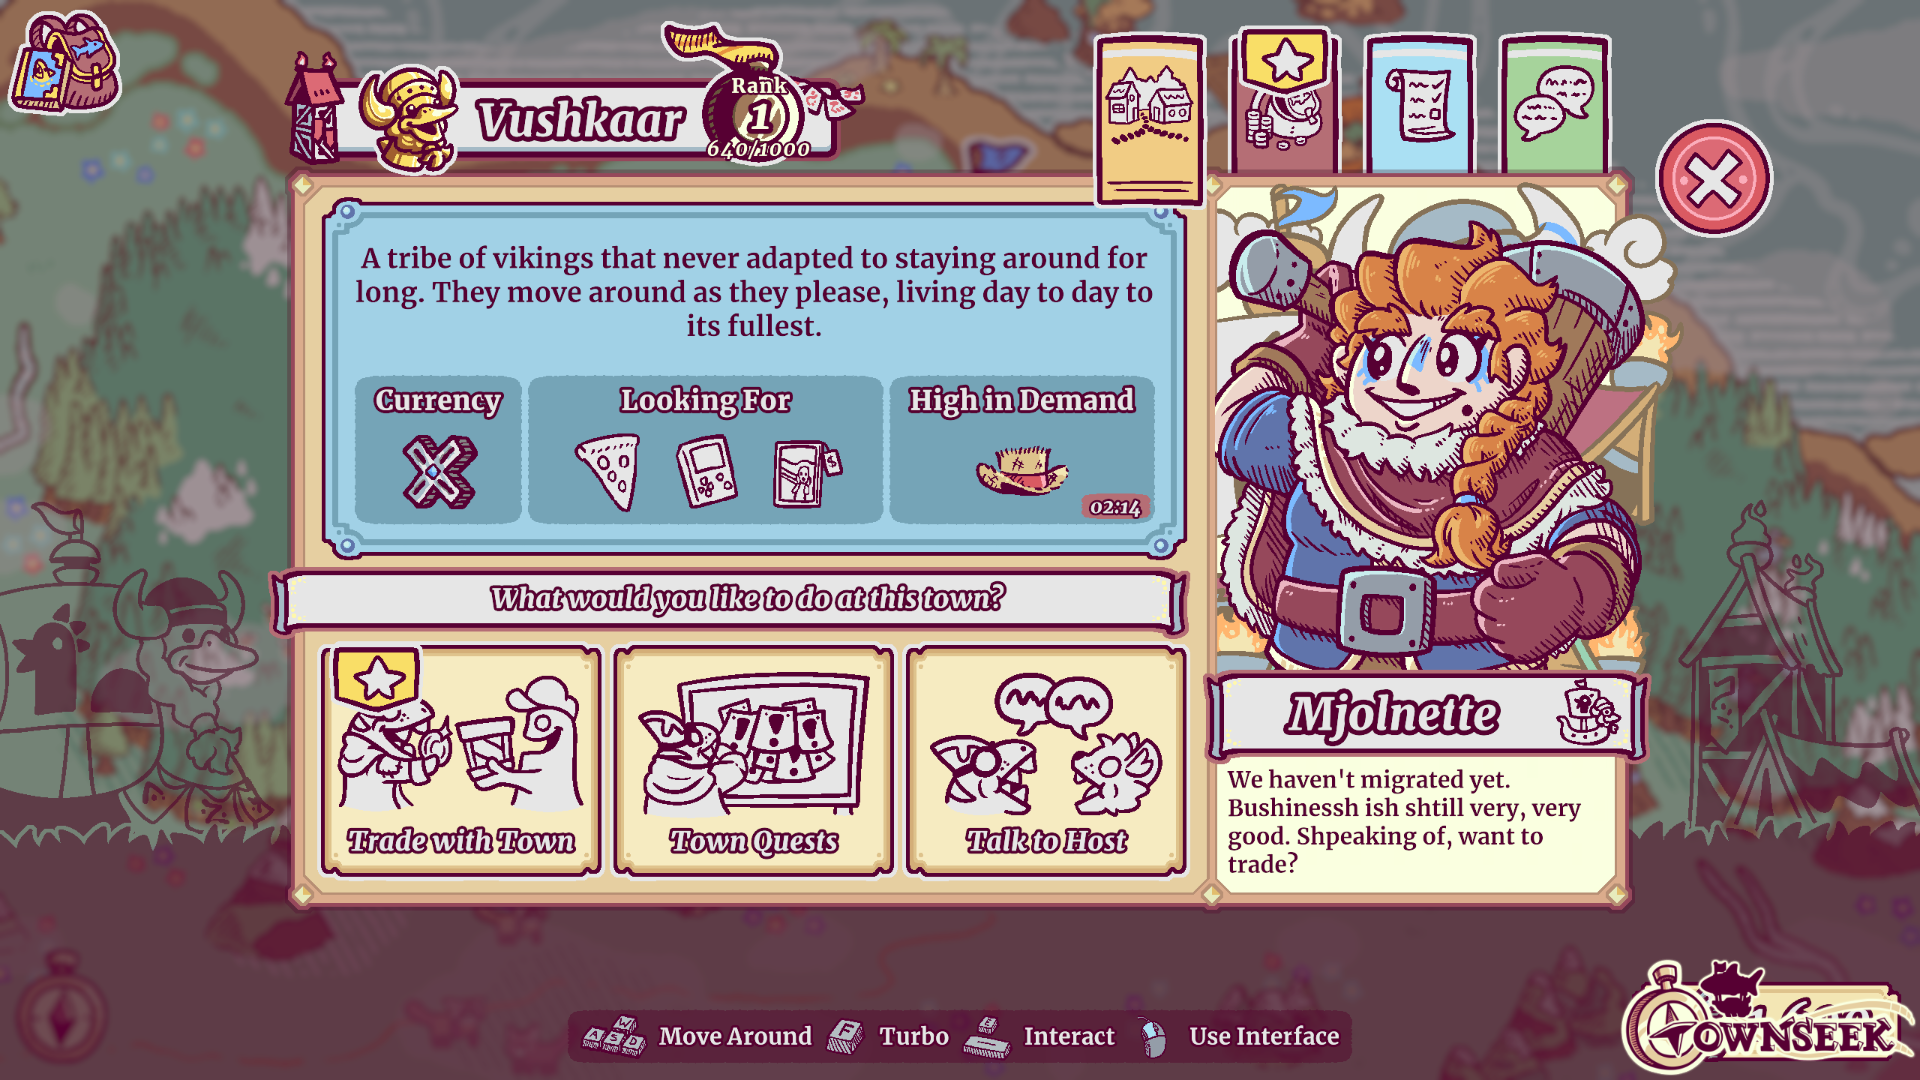 A screenshot of Townseek showing the new nomadic town of Vushkaar. In the town hub, the player is welcomes by Mjolnette, a strong women dwarf with orange hair and a big hammer. Announced during Wholesome Direct.